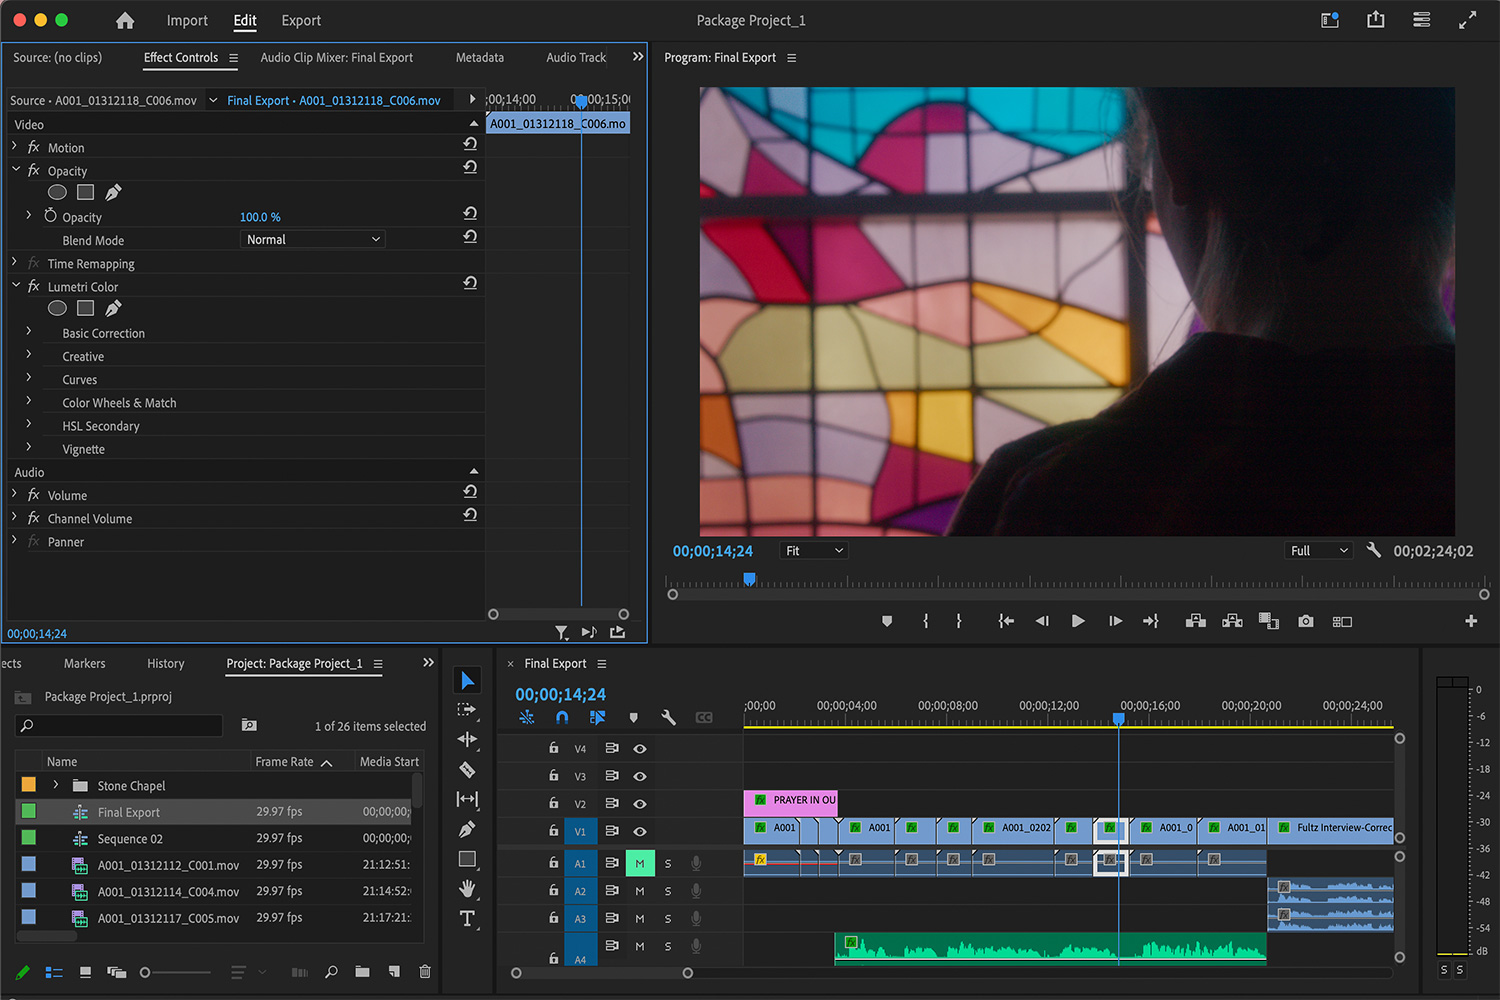 An image of a video project being edited in Adobe Premiere Pro.